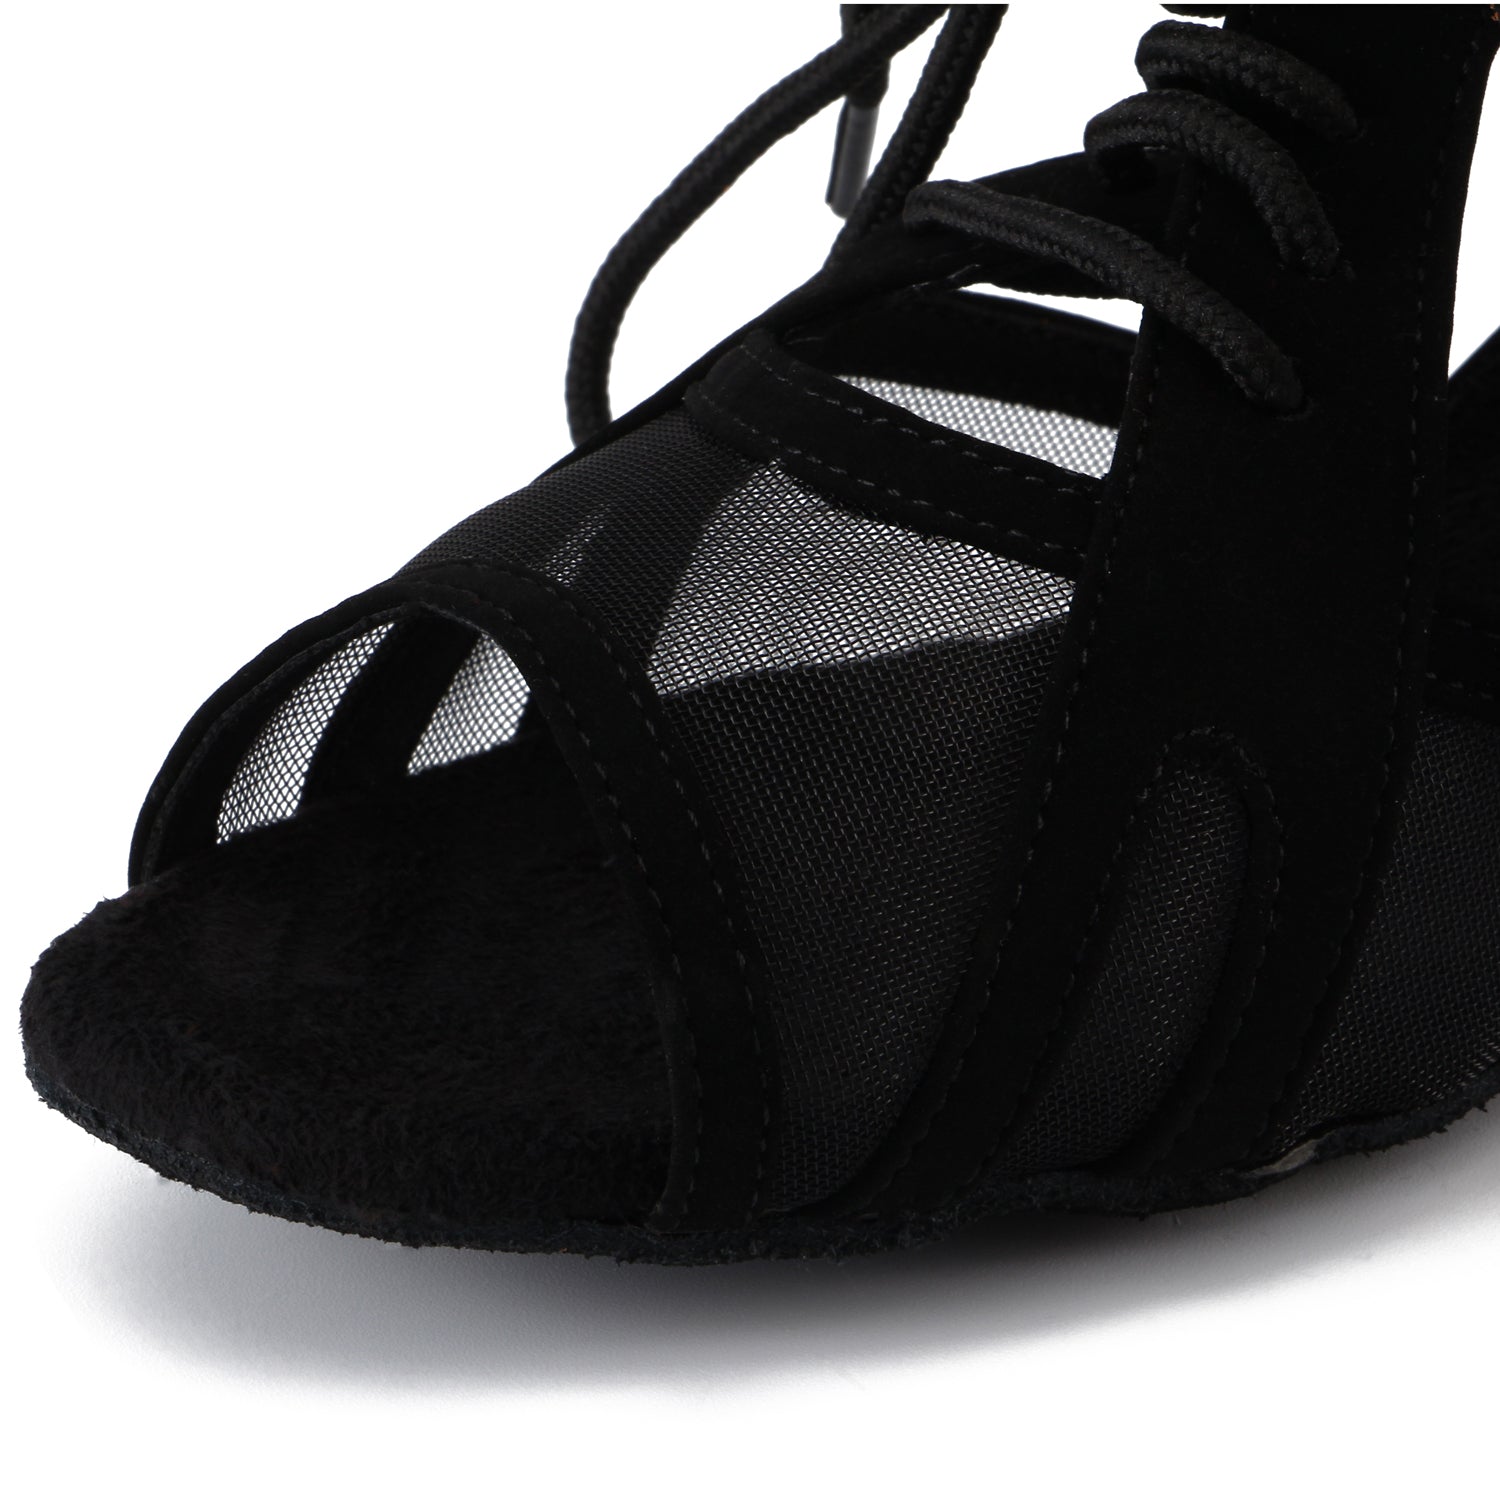 Women Ballroom Dancing Shoes with Suede Sole, Lace-up Open-toe Design in Black for Tango Latin Practice - PD-3002A3